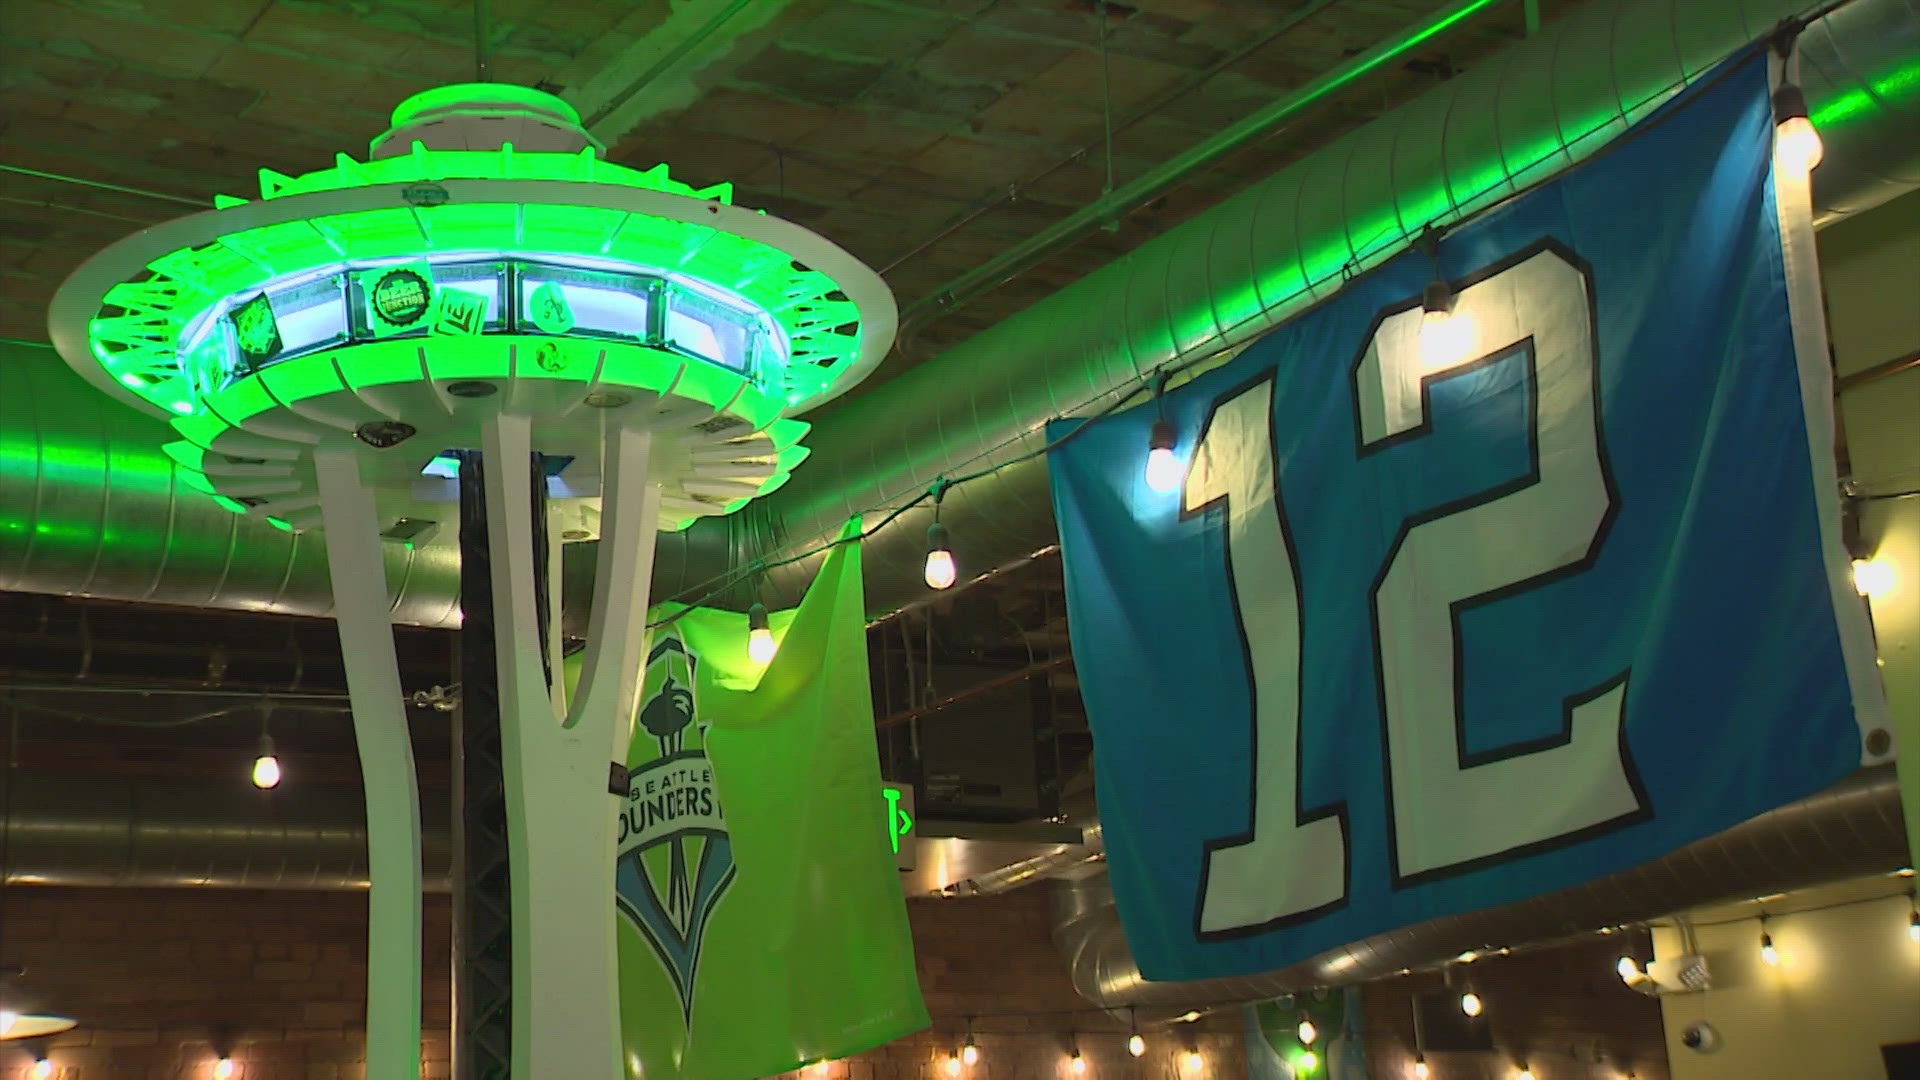 Local bars in Seattle are hoping to cash in on the historic Seahawks Thanksgiving game by keeping their doors open well past the Thanksgiving eve rush.